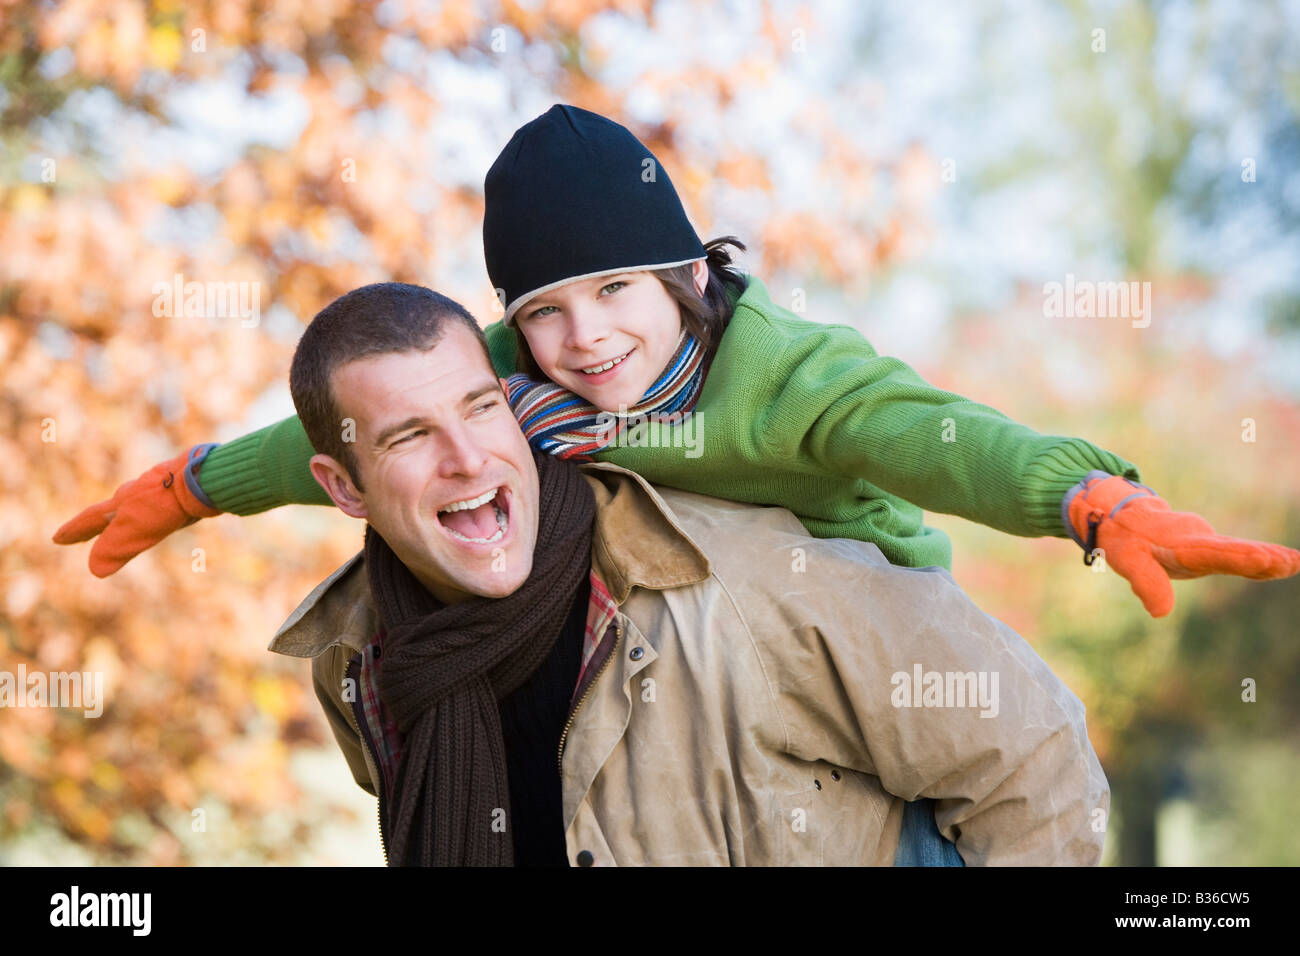 Father piggybacking son outdoors at park and smiling (selective focus) Stock Photo